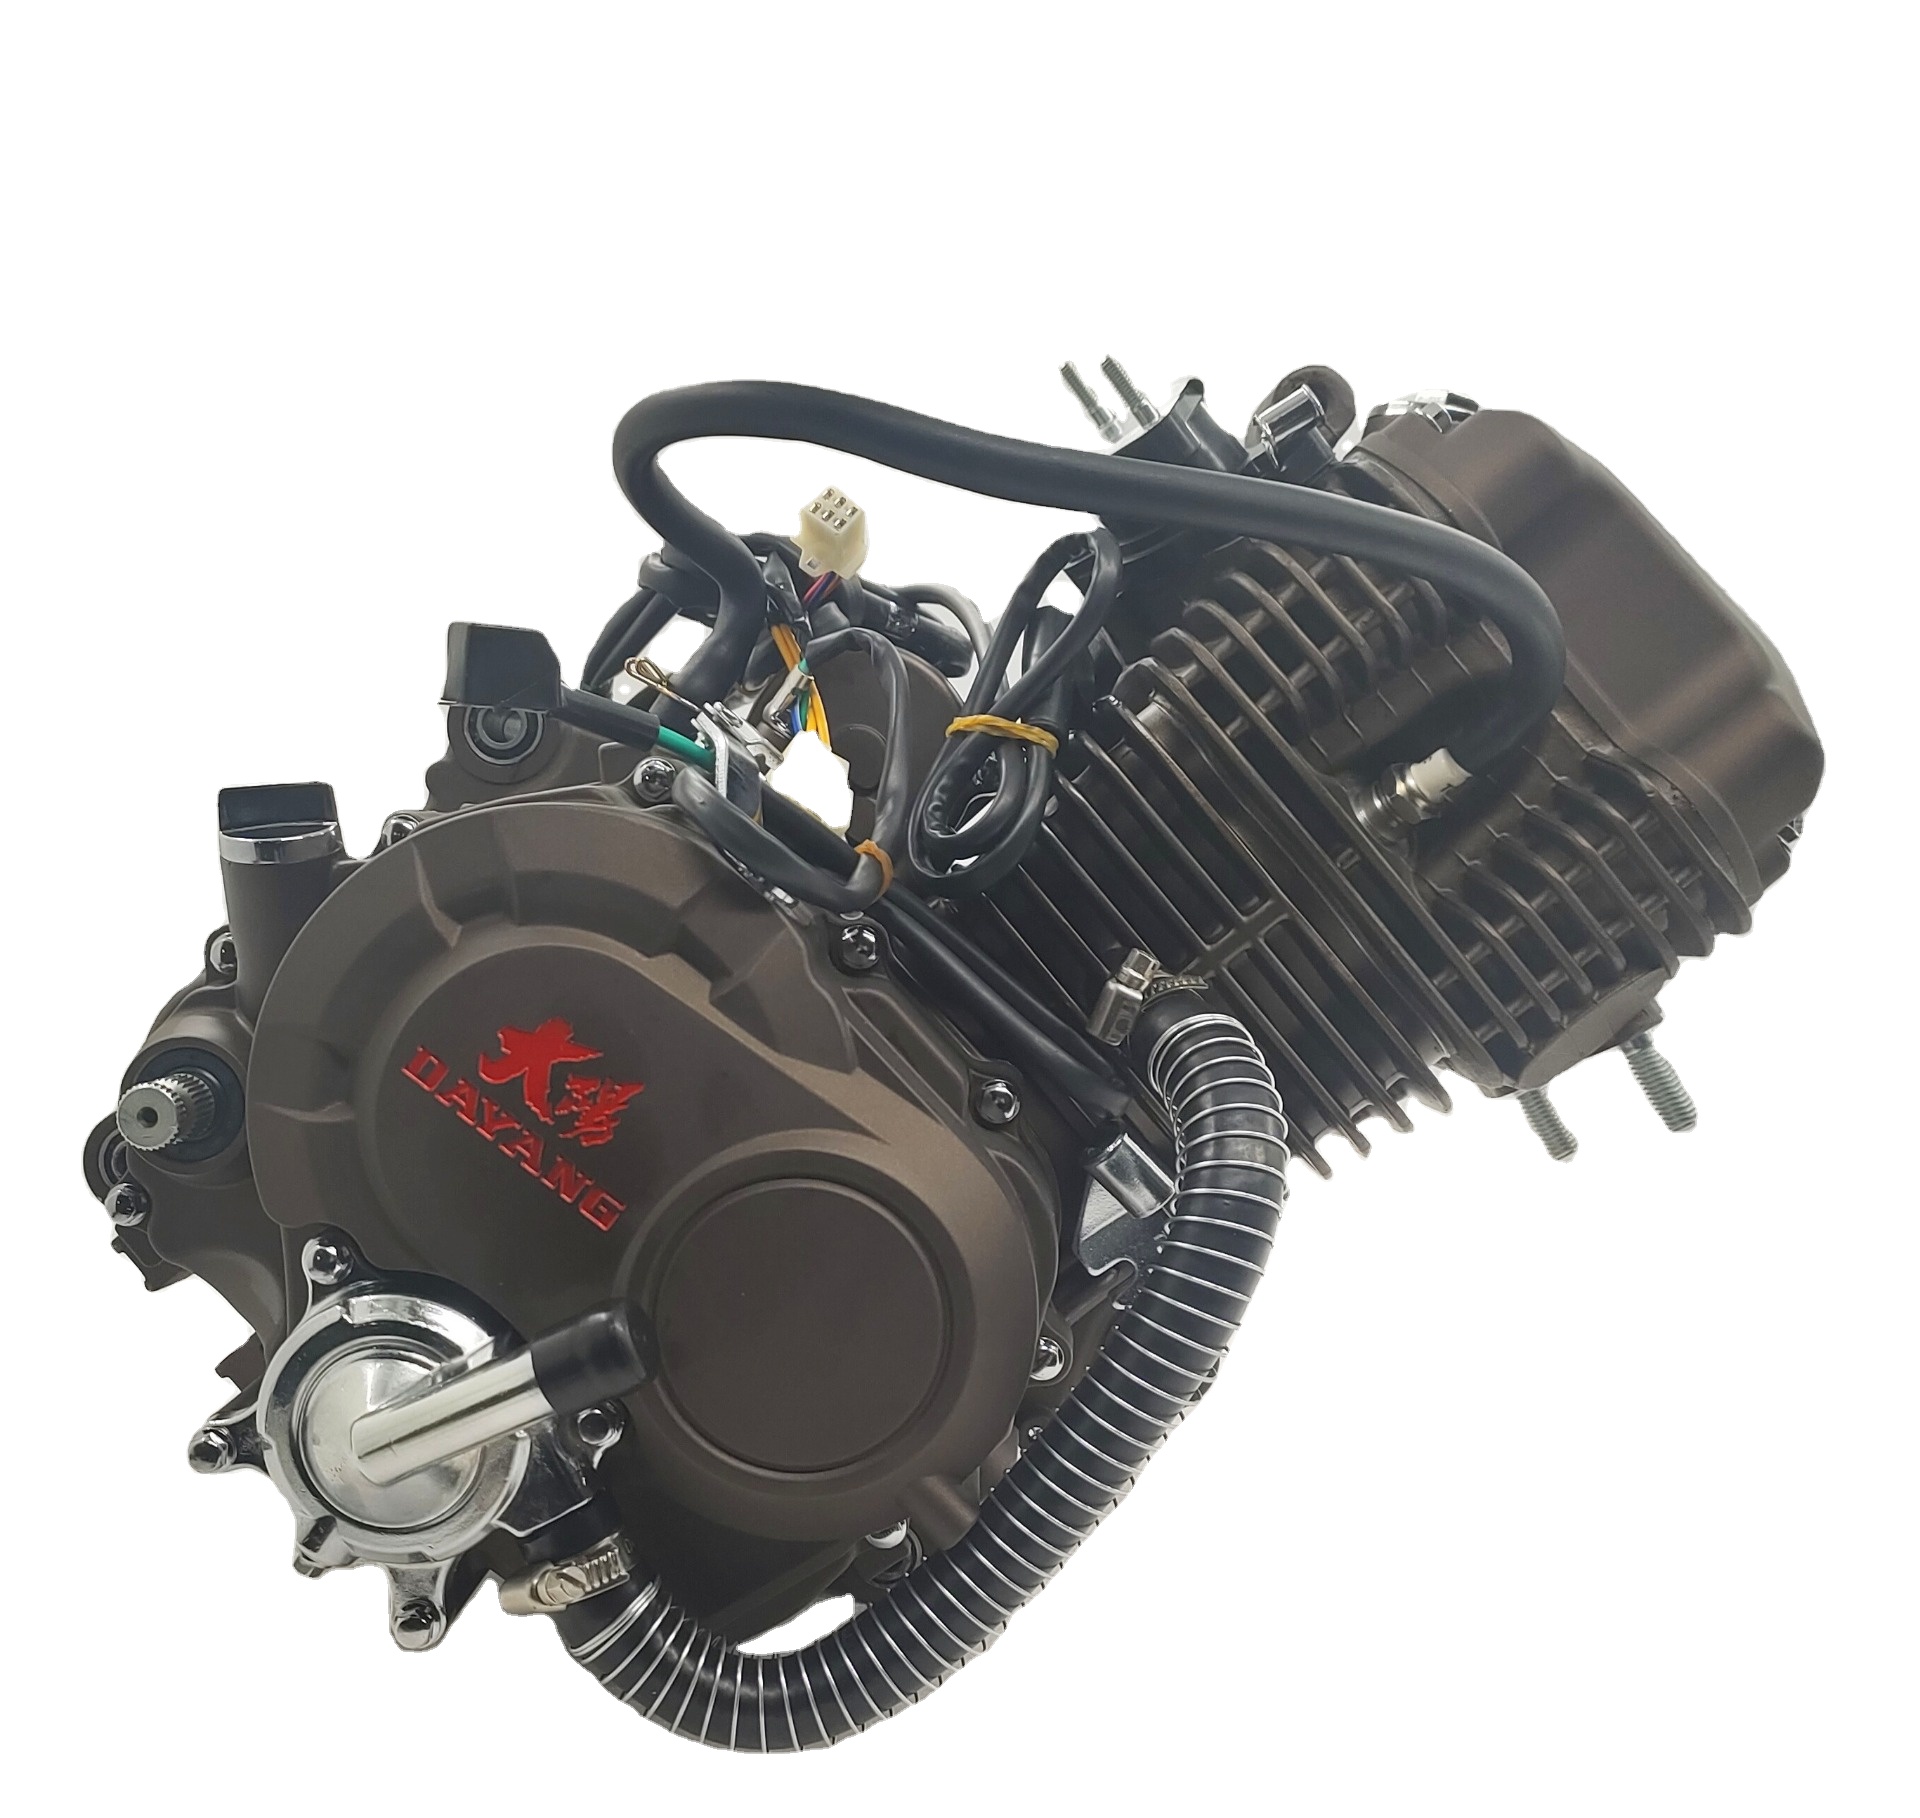 Good Quality Strong China Made Gasoline CG250 super cold 250CC tricycle Engine Motorcycle Engine Assembly